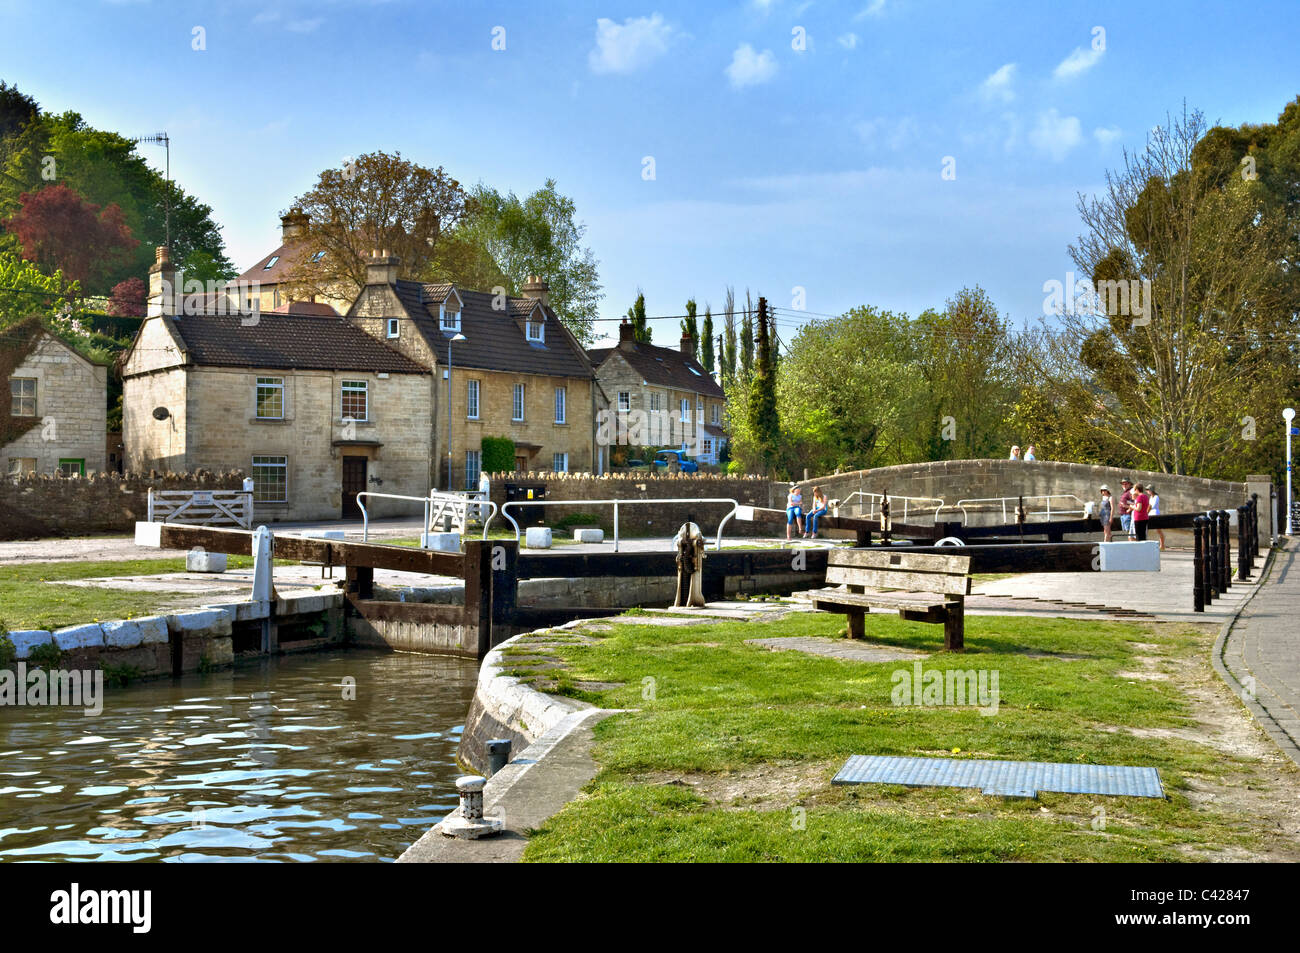 Busy  Spring, early summer canal scene on the Kennet and avon canal taken at Bradford on Avon, Wiltshire, England, uk Stock Photo